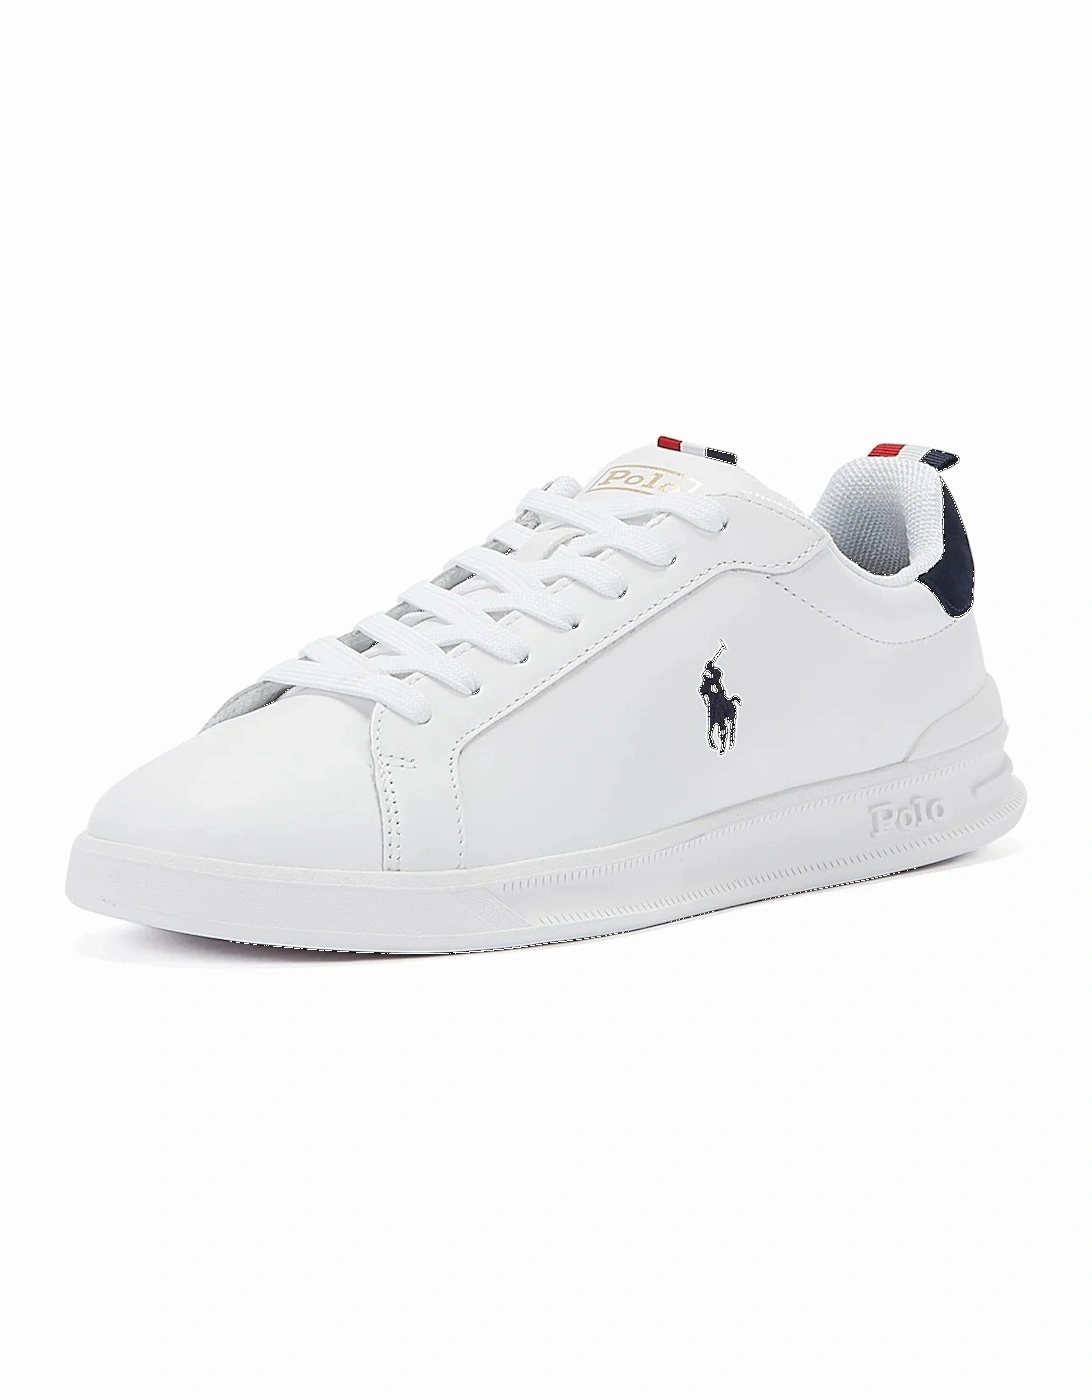 Hrt Ct II Sneakers Low Men's White Trainers